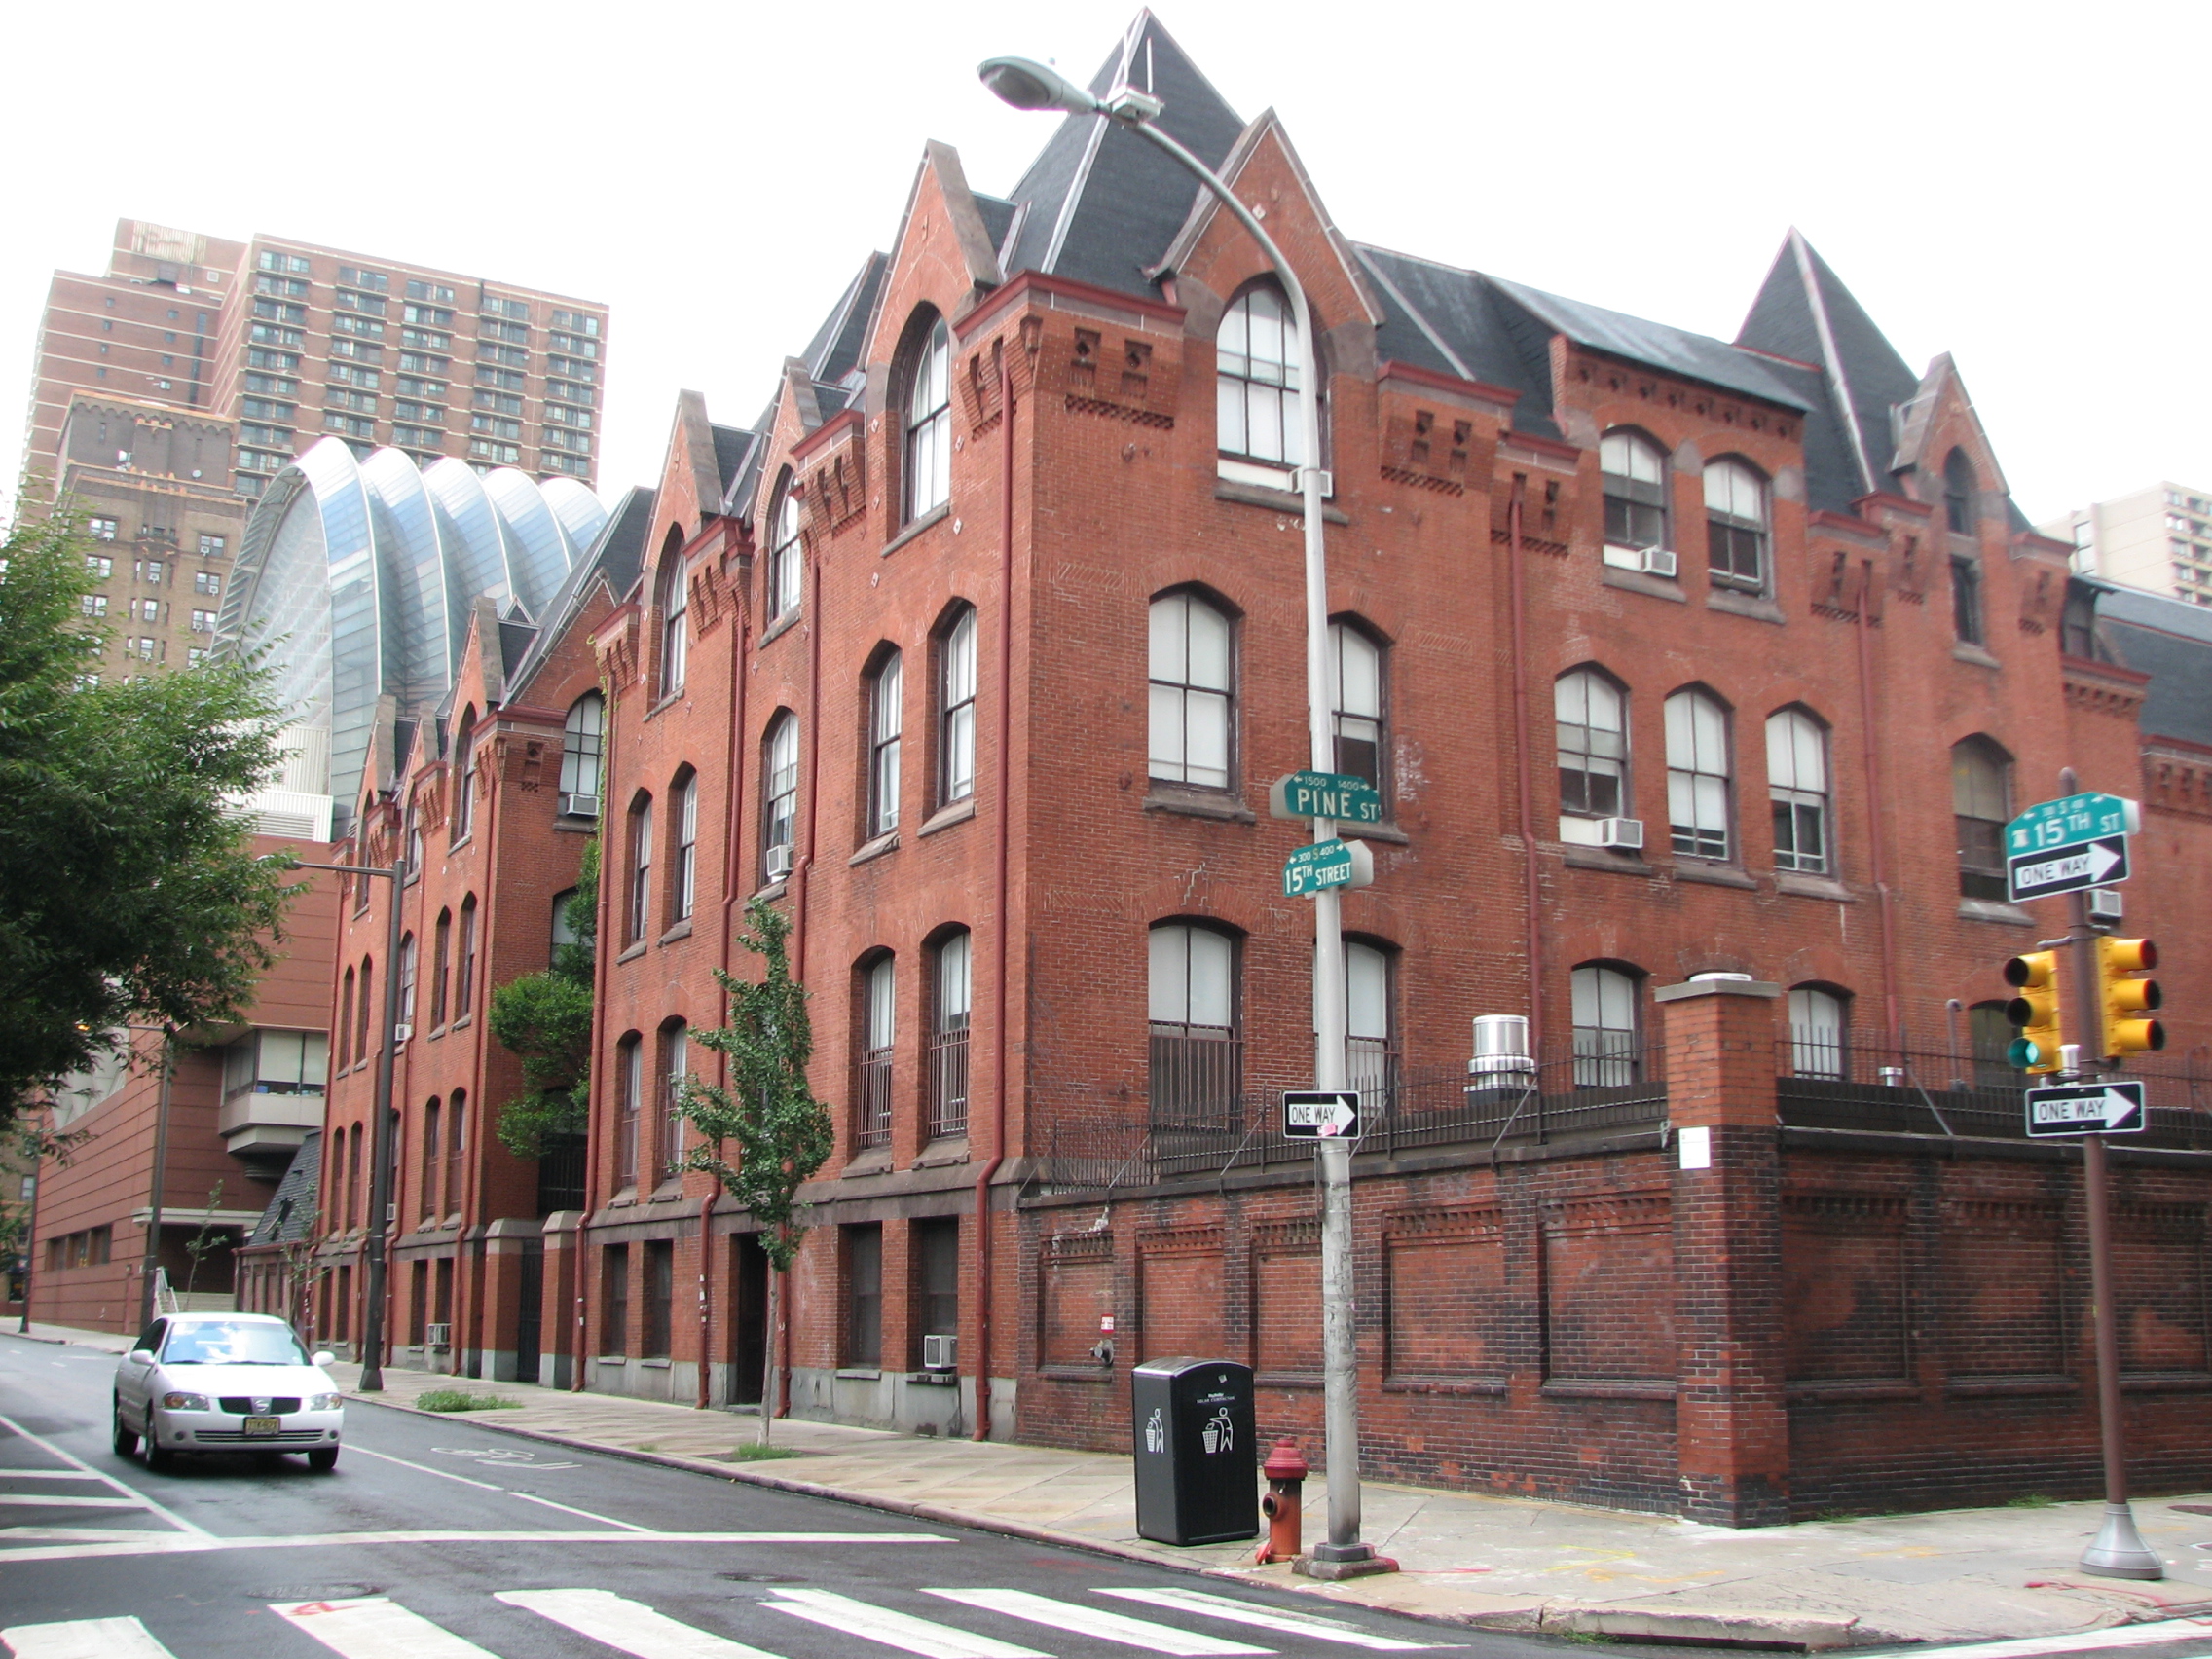 Frank Furness added the Victorian Gothic additions that extended the building to 15th Street.